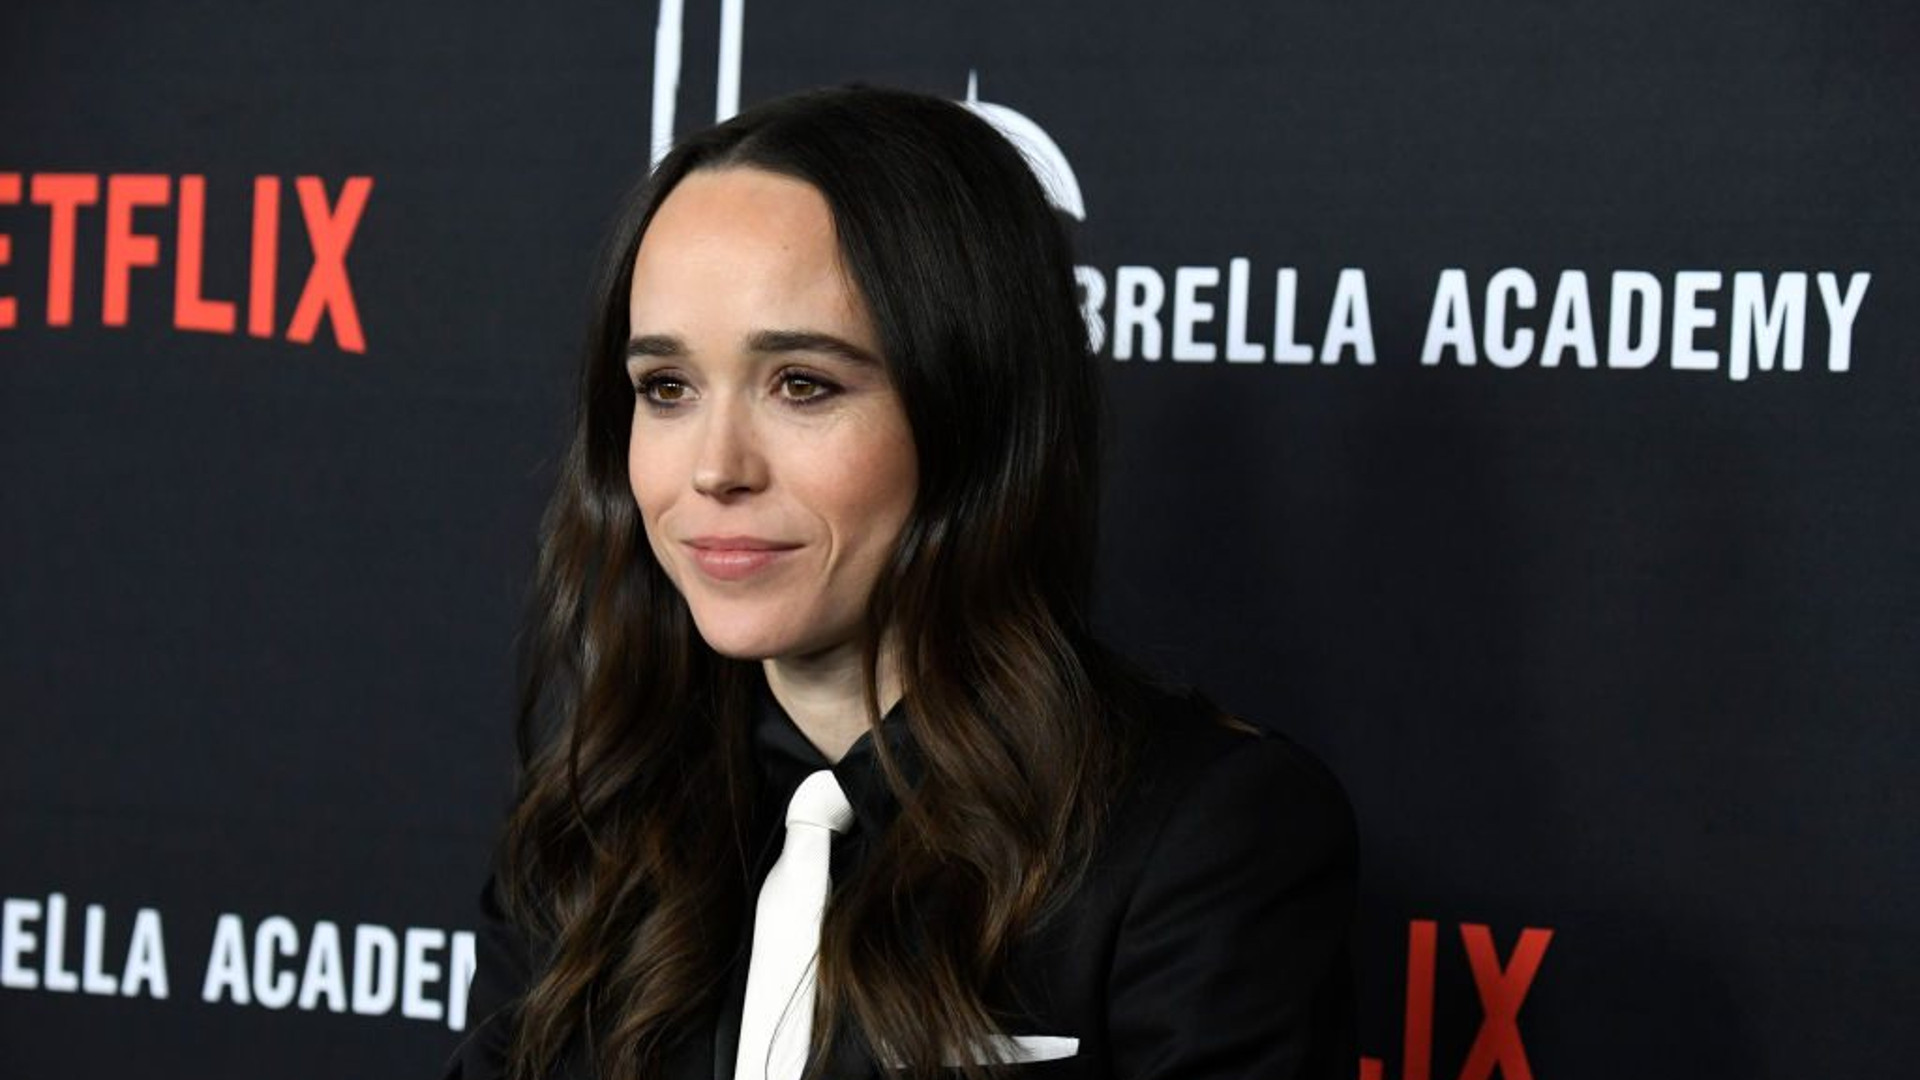 BuzzFeed’s making a comedy film about esports with Ellen Page